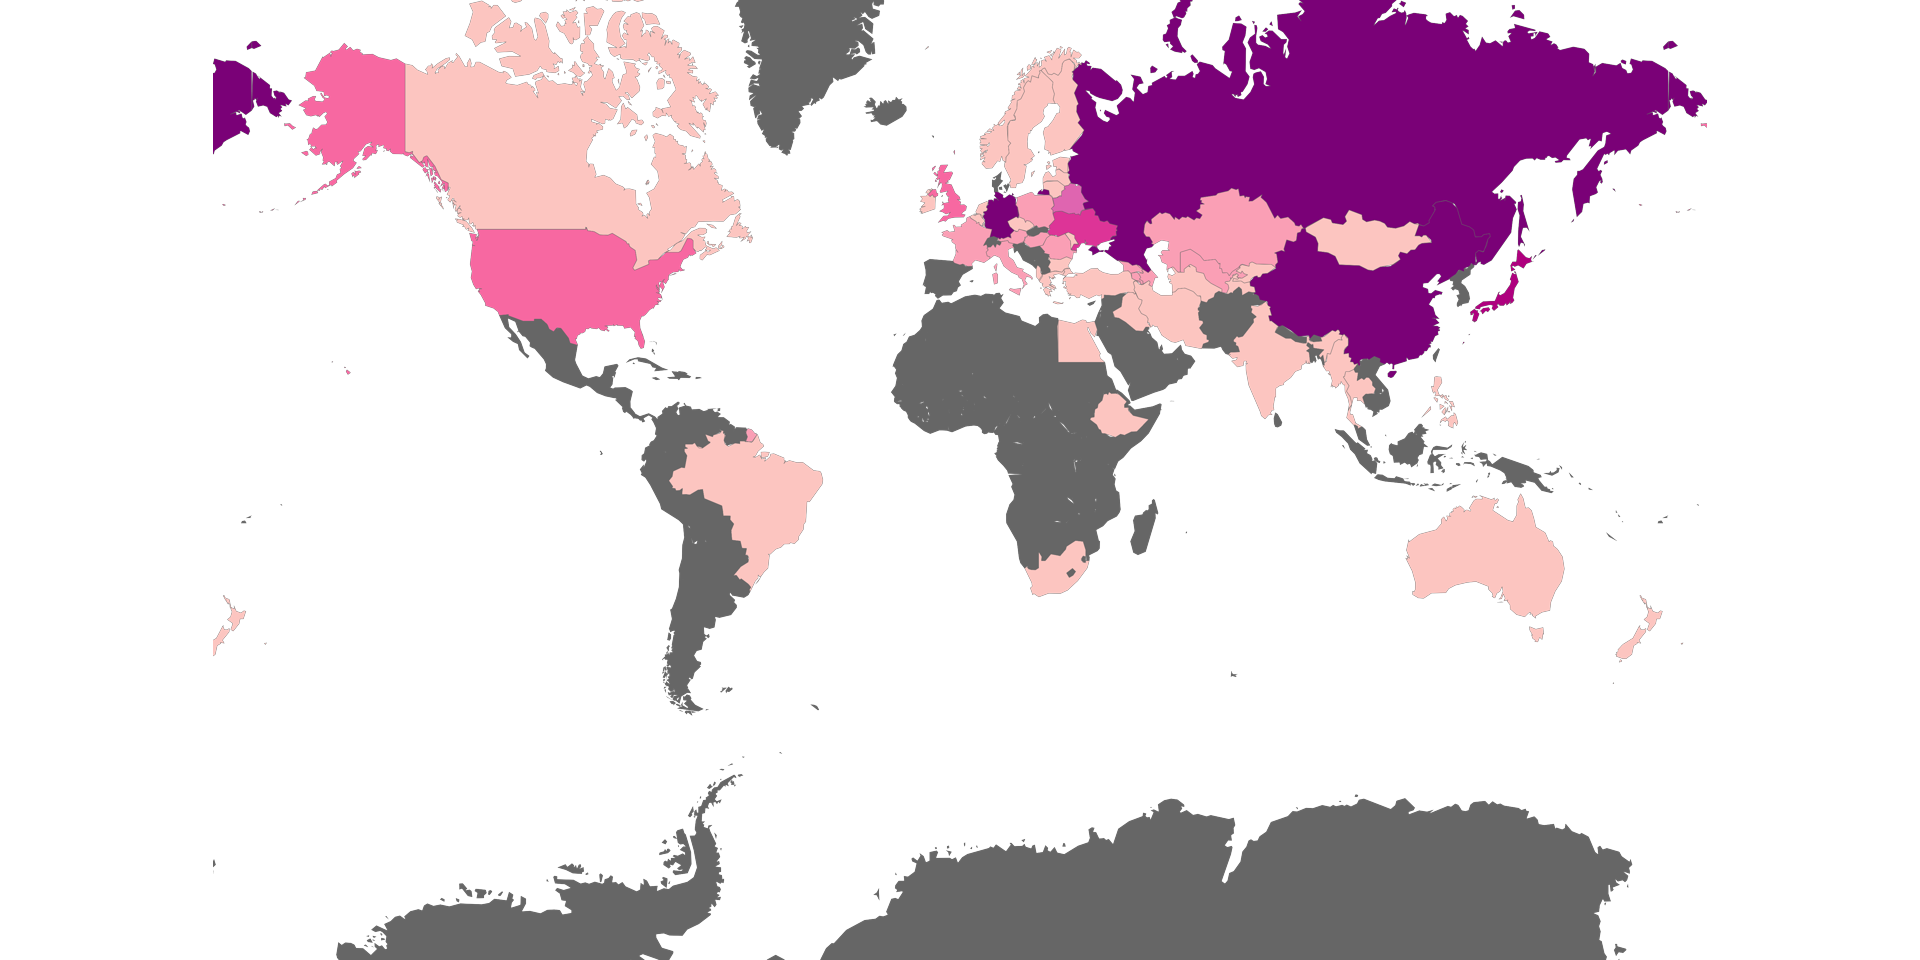 world-war-2-deaths-by-country-map-the-unmapped-mapstack